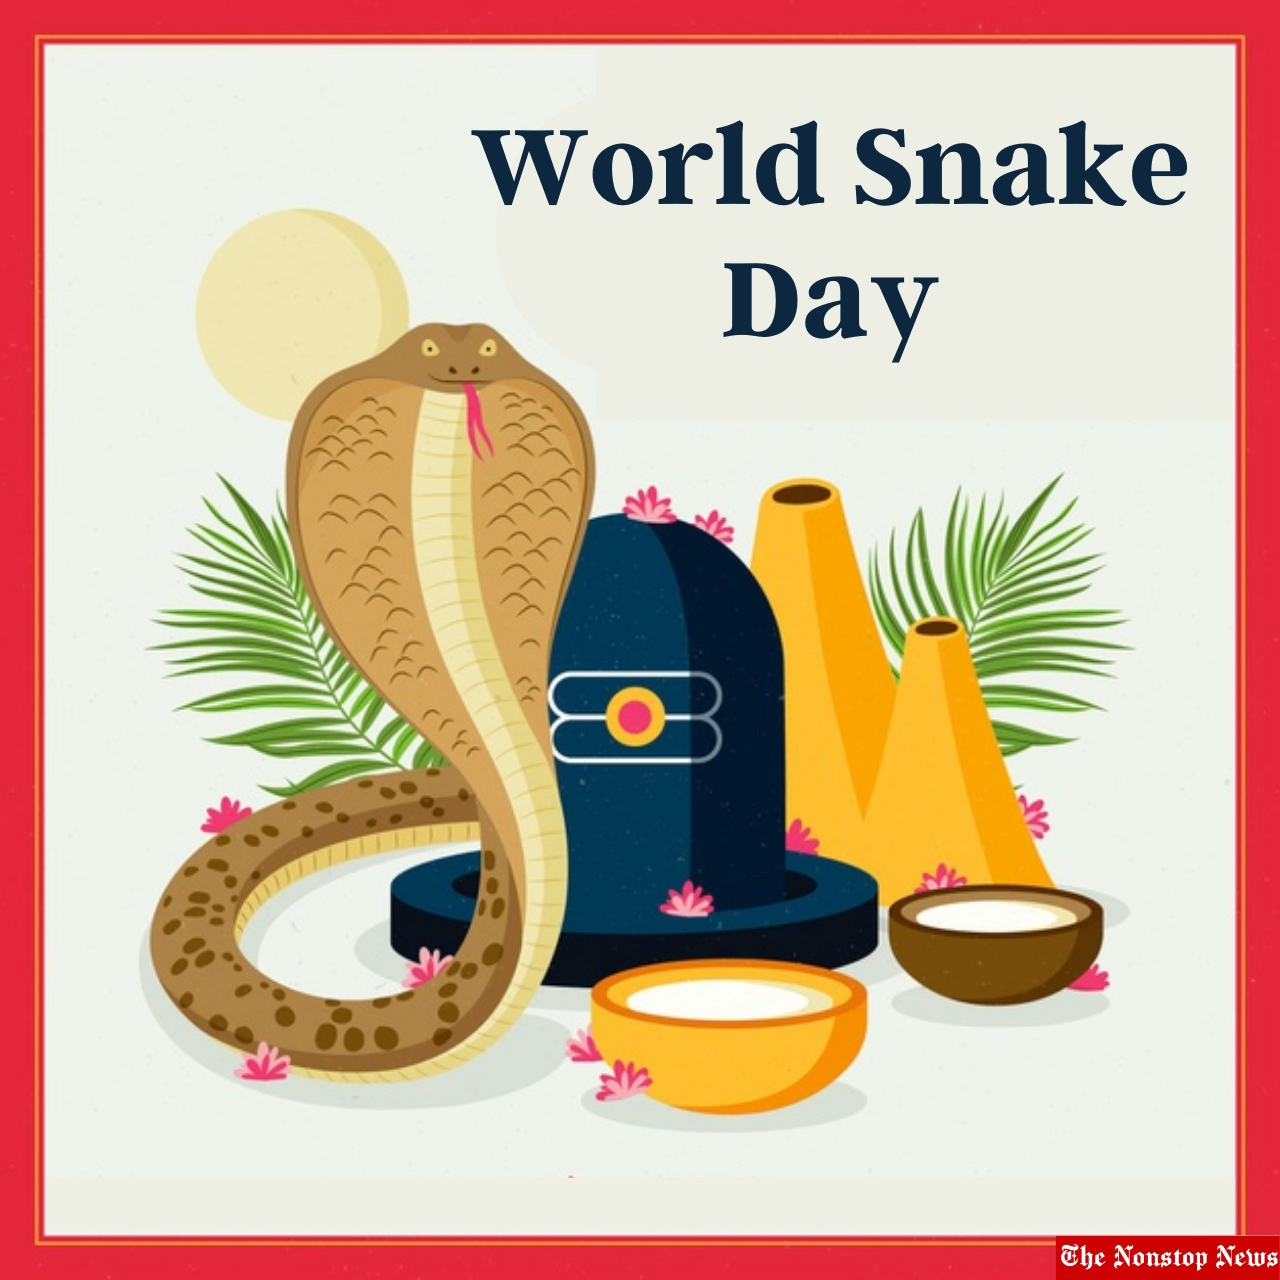 World Snake Day 2021 Theme, Quotes, Images, Slogan, Meme, Messages, and WhatsApp Status Video to Download